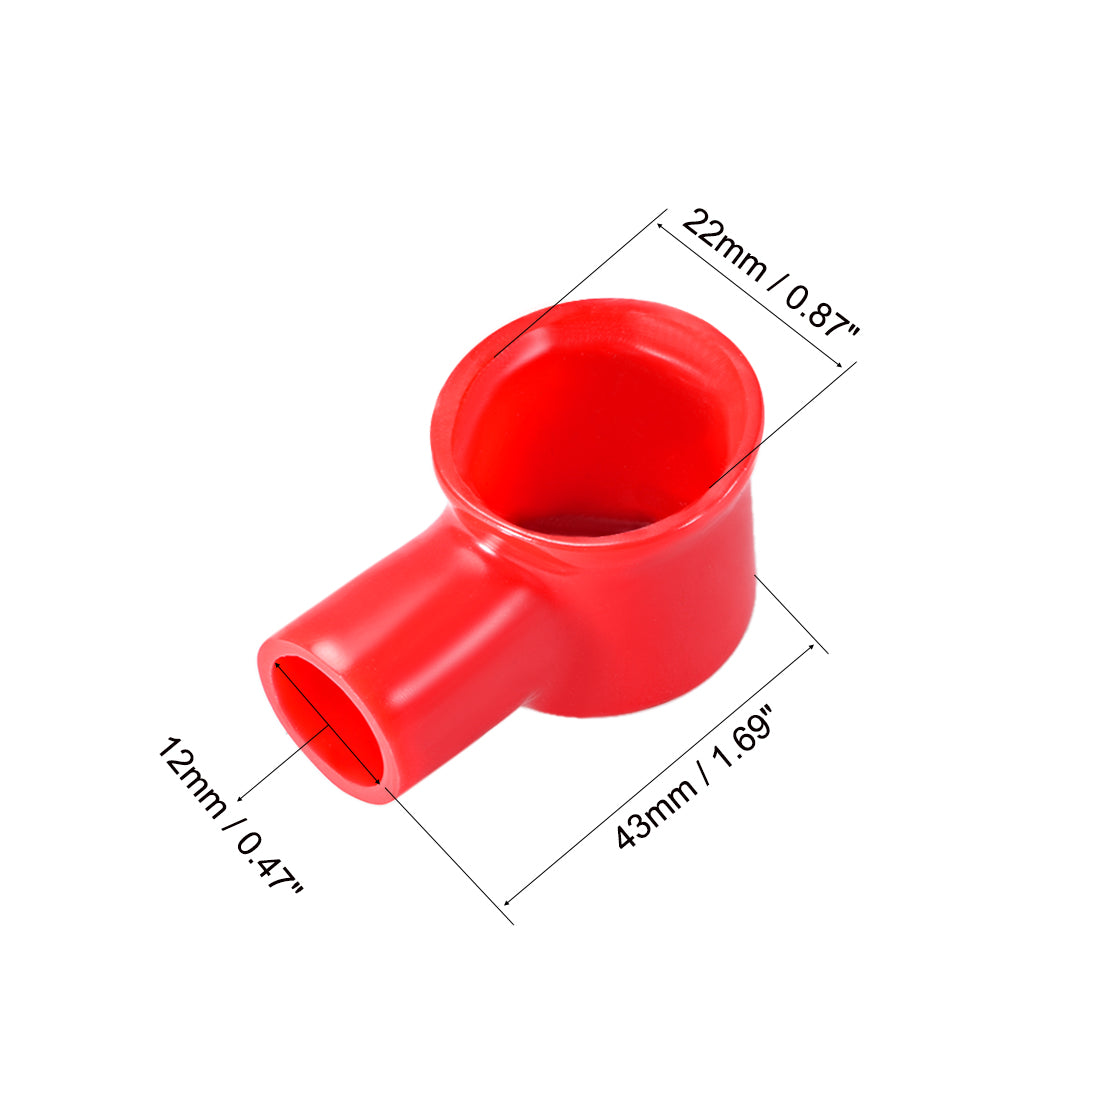 uxcell Uxcell Battery Terminal Insulating Rubber Protector Covers for 22mm Terminal 12mm Cable Red Black 5 Pairs